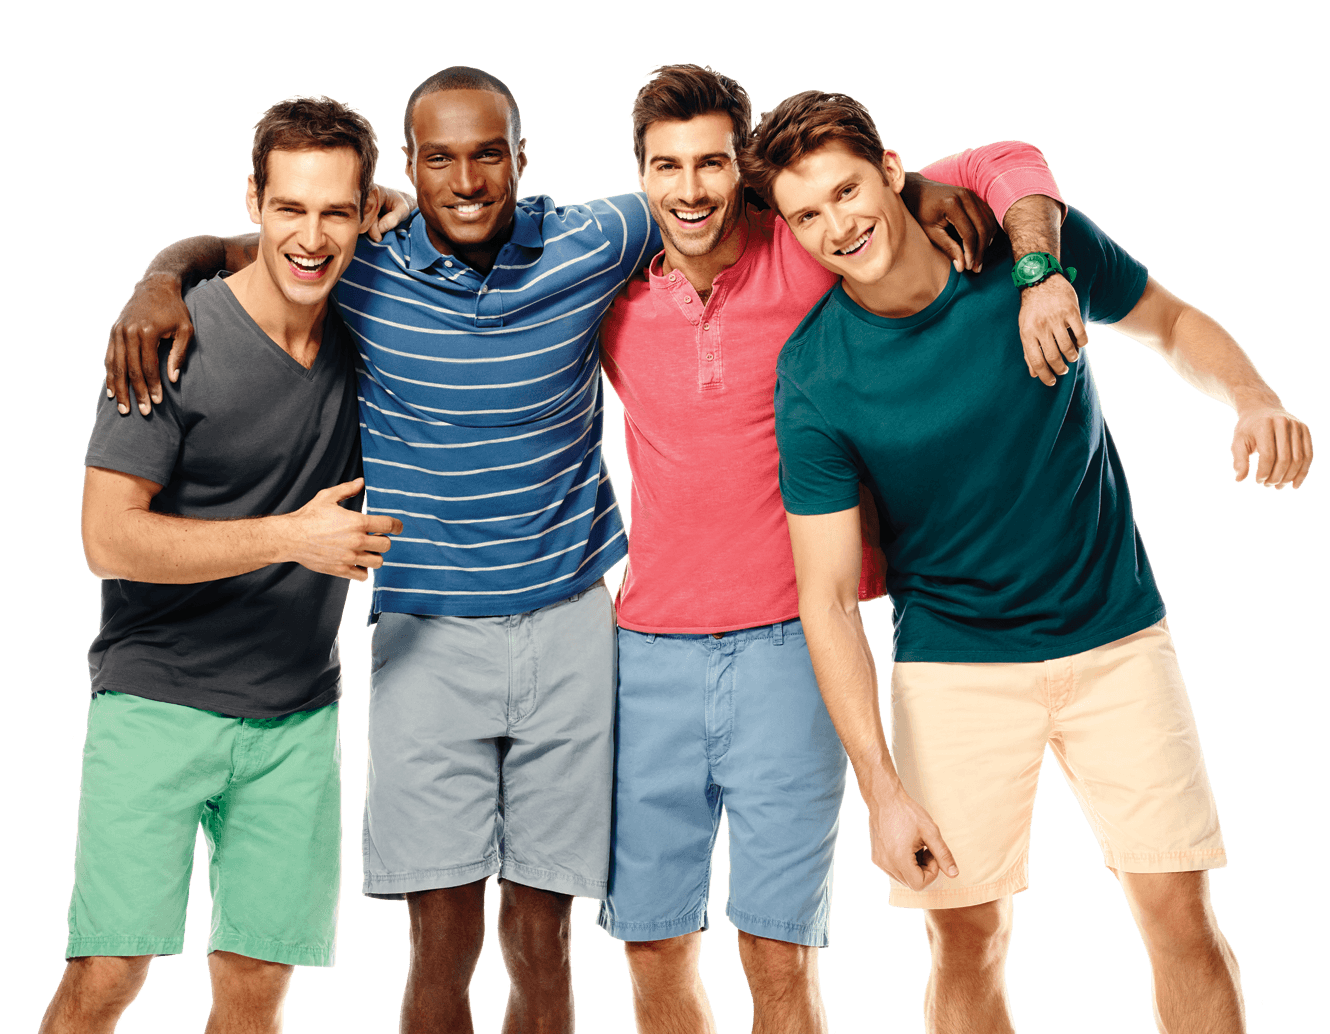 Group Of Men Png Hdpng.com 1330 - Group Of Men, Transparent background PNG HD thumbnail